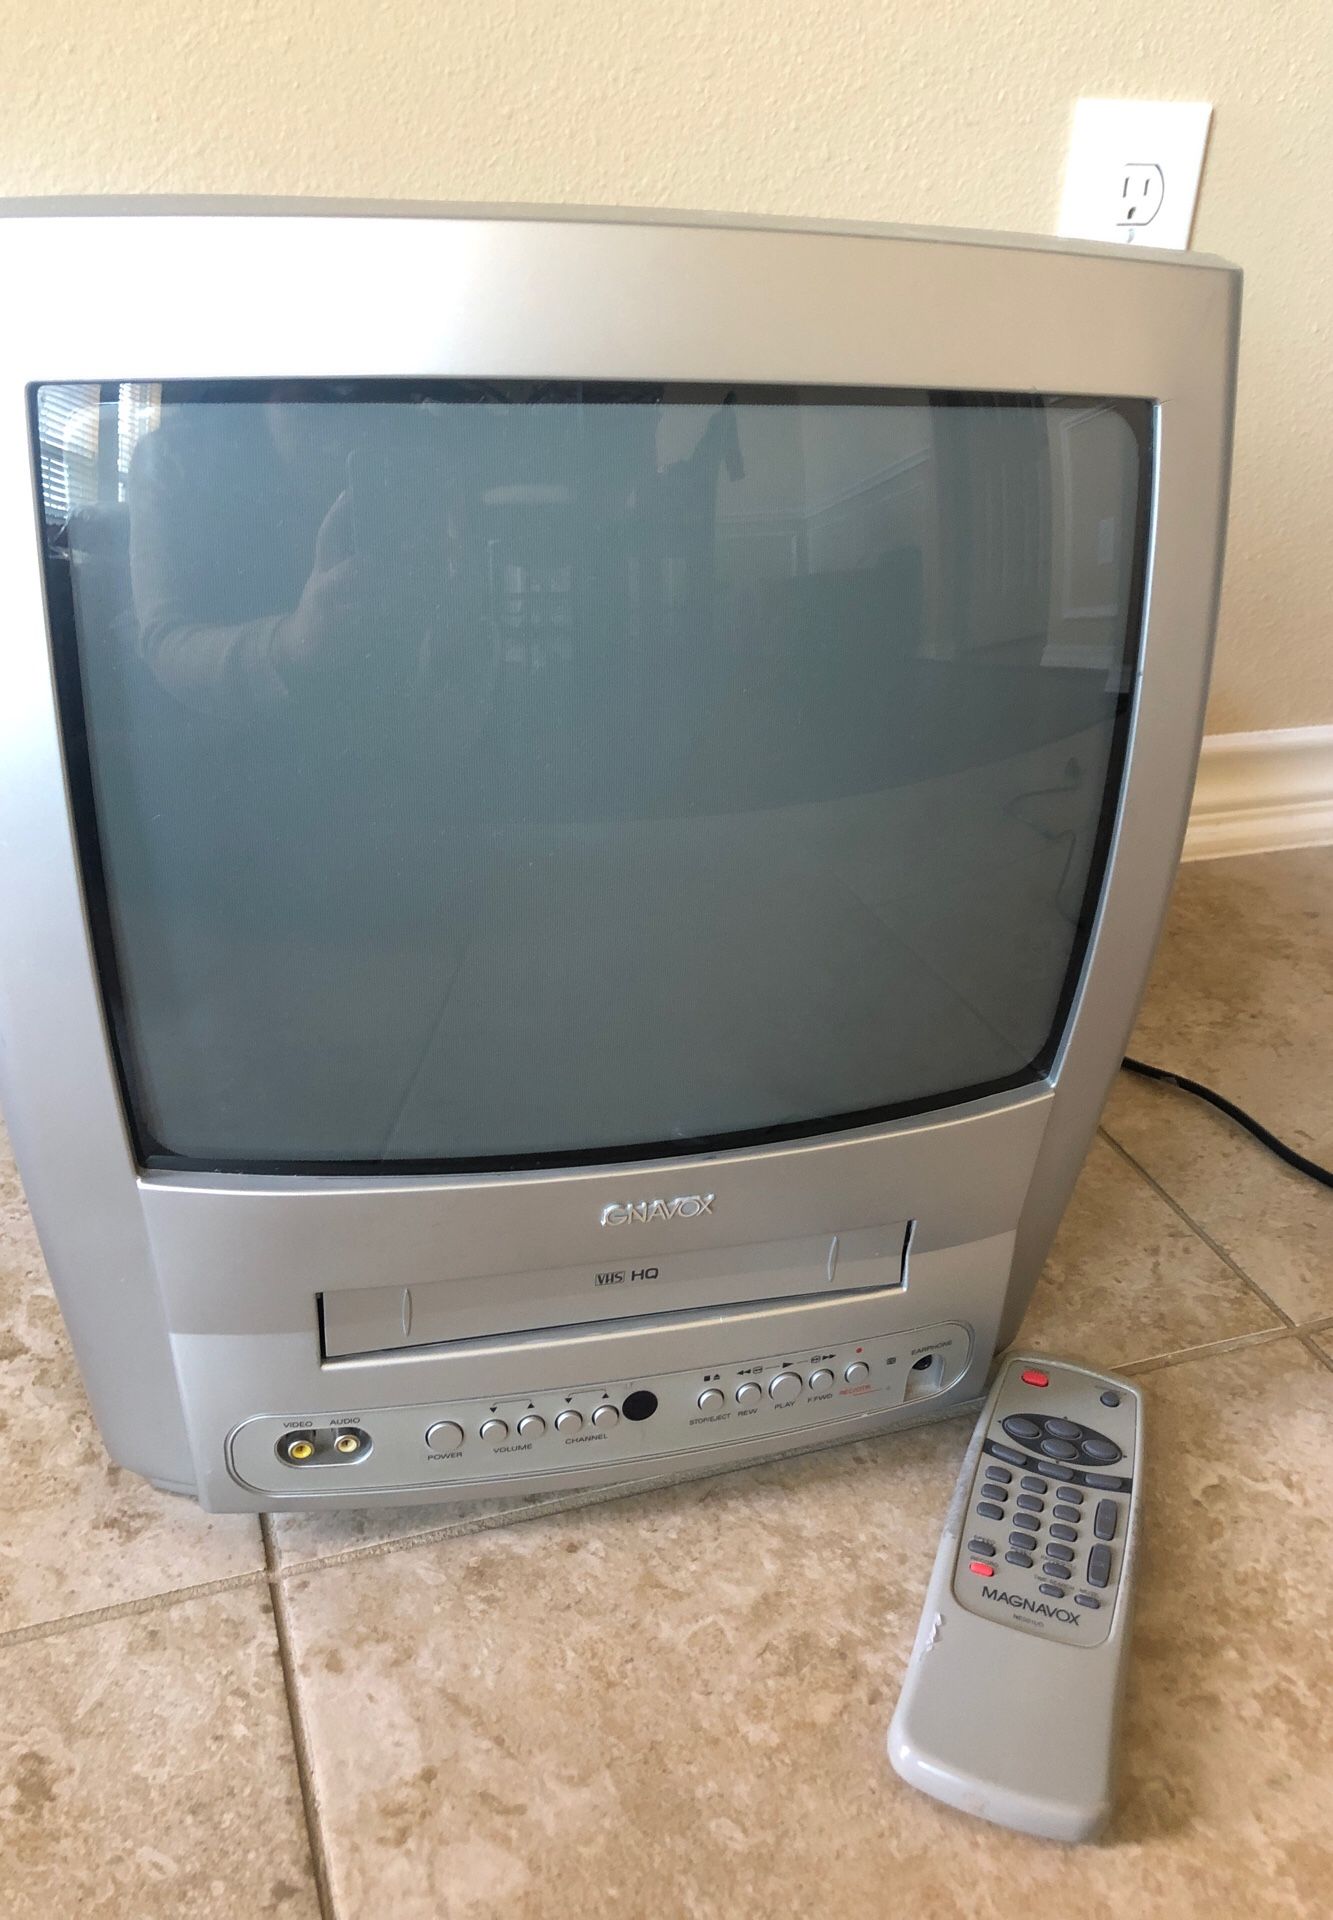 Gray Magnavox tv with vhs player